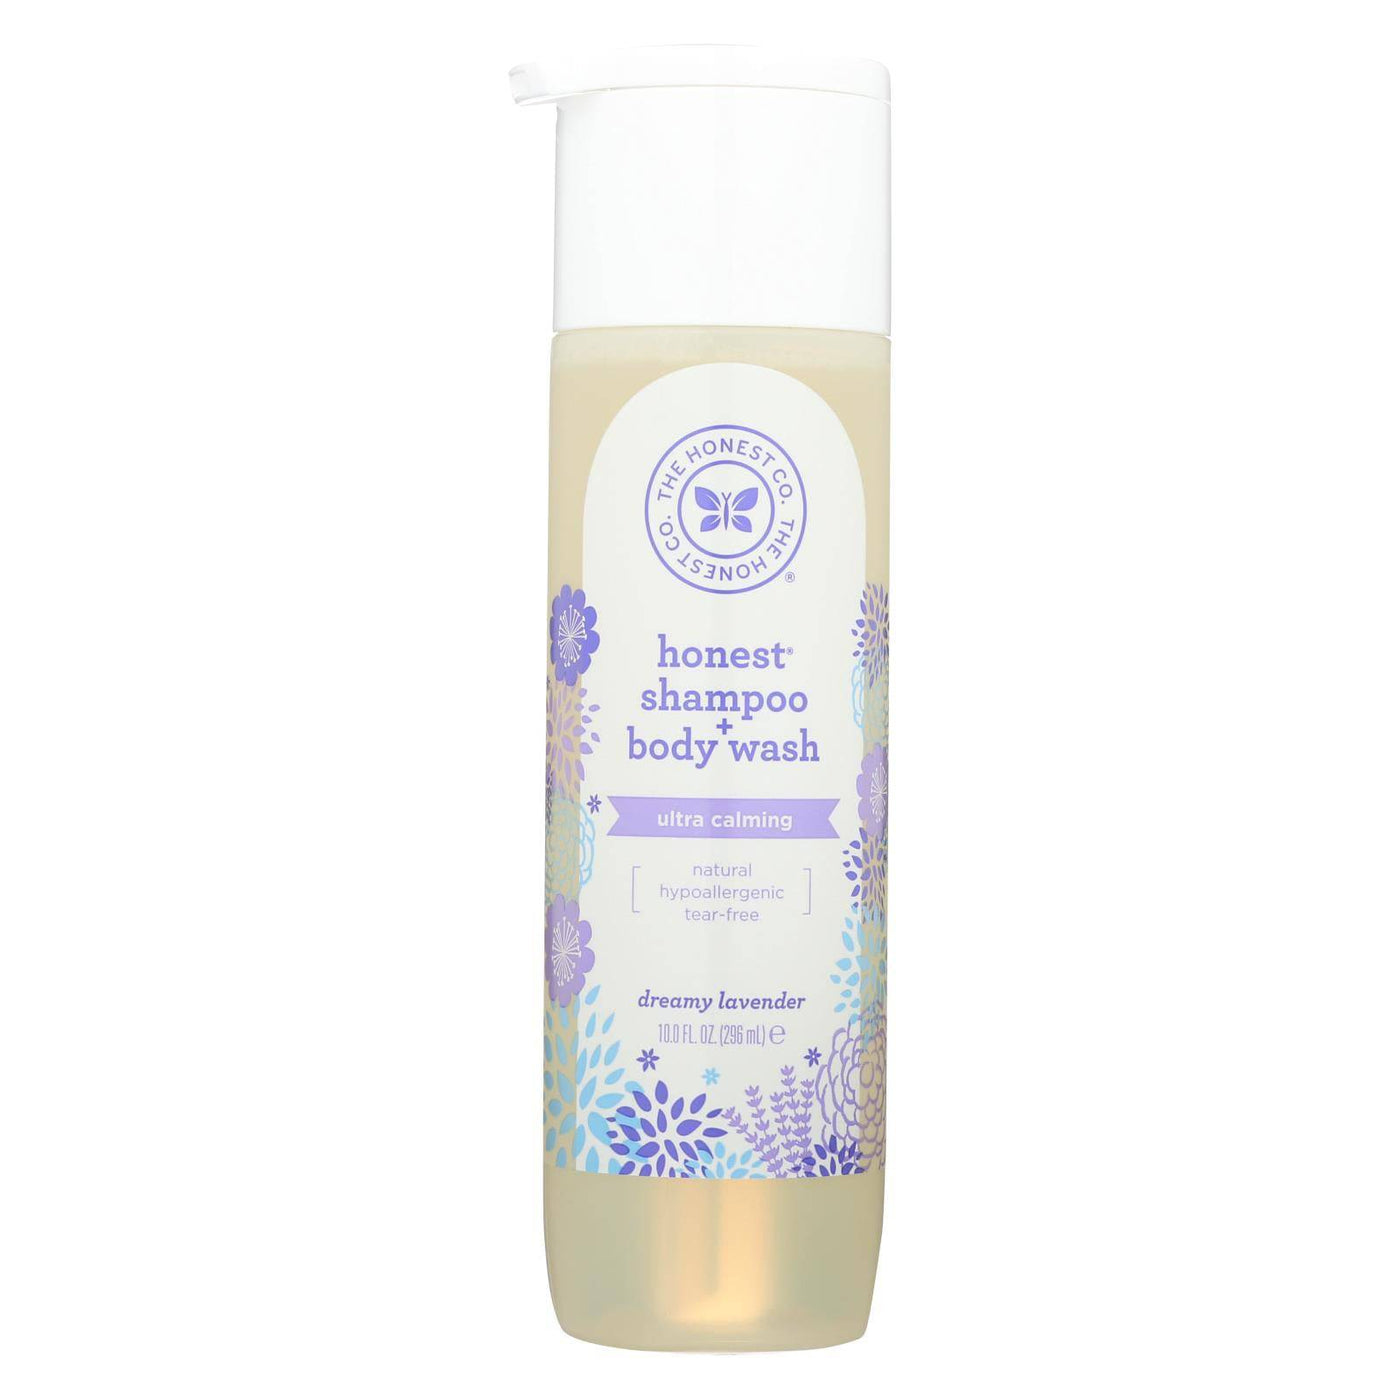 Buy The Honest Company Shampoo And Body Wash - Dreamy Lavender - 10 Fl Oz  at OnlyNaturals.us